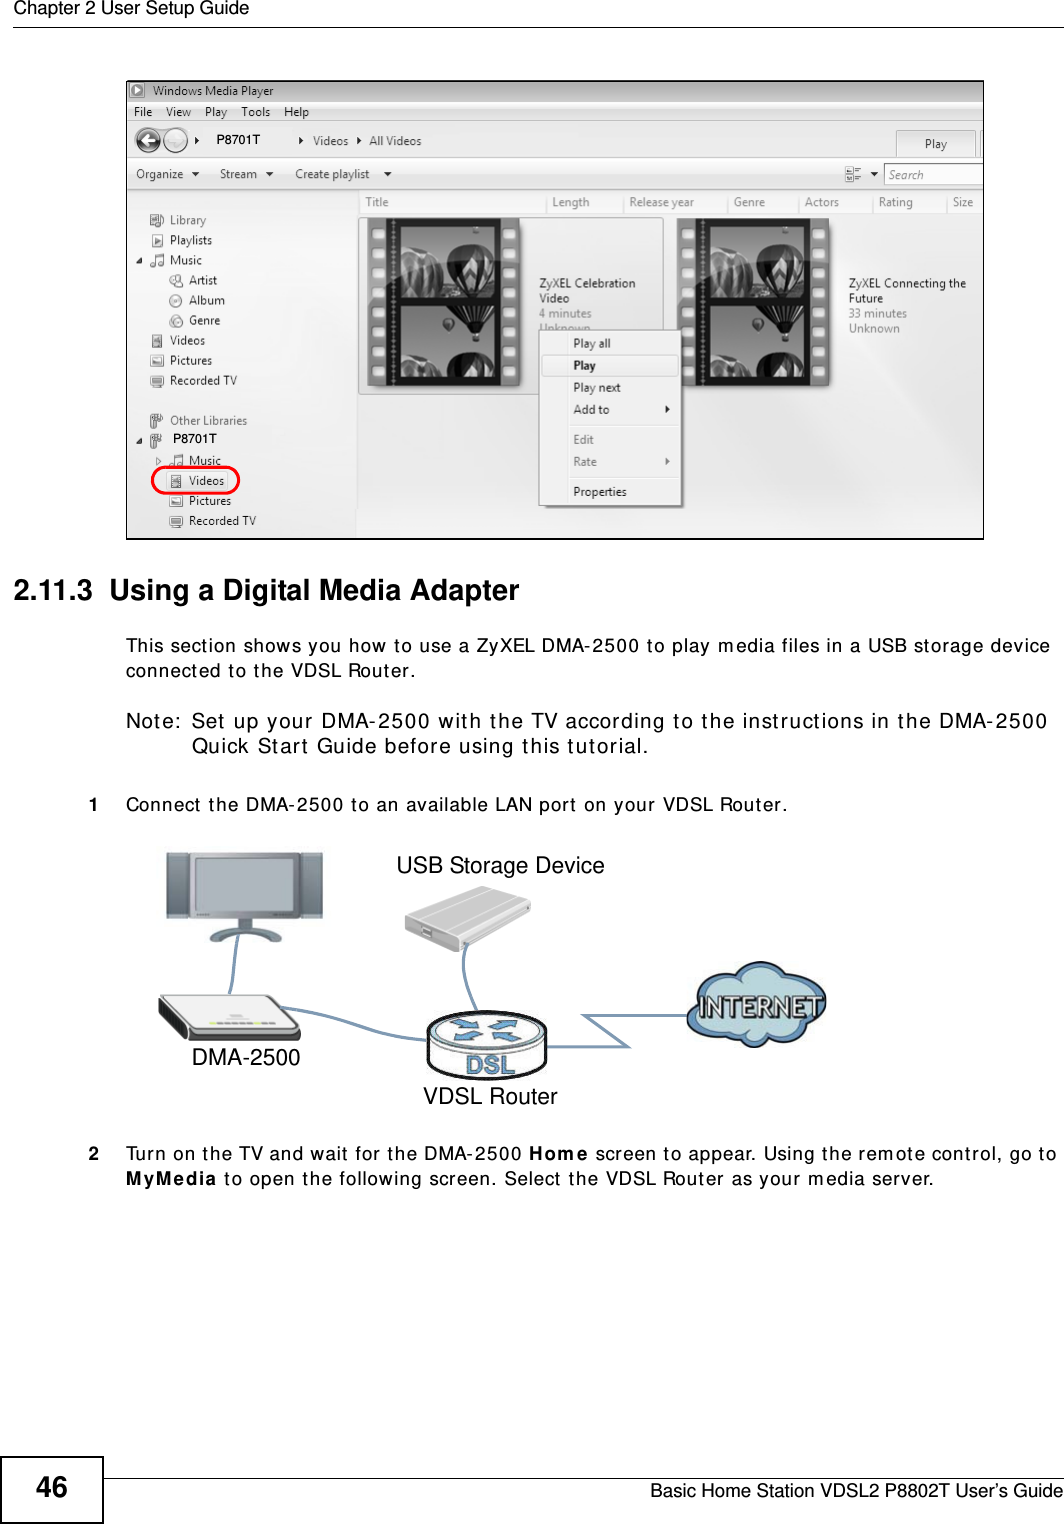 Chapter 2 User Setup GuideBasic Home Station VDSL2 P8802T User’s Guide46Tutorial: Media Sharing using Windows 7 (2)2.11.3  Using a Digital Media AdapterThis sect ion shows you how t o use a ZyXEL DMA-2500 to play m edia files in a USB st orage device connect ed to t he VDSL Router.Note:  Set up your DMA-2500 with the TV according t o the inst ruct ions in the DMA- 2500 Quick St art  Guide before using this tut orial.1Connect  the DMA- 2500 t o an available LAN port  on your VDSL Router.Tutorial: Media Server Setup (Using DMA)2Turn on the TV and wait  for the DMA- 2500 Hom e screen t o appear. Using t he remot e control, go t o MyM edia  to open t he following screen. Select  the VDSL Router as your m edia server.P8701TP8701TDMA-2500VDSL RouterUSB Storage Device